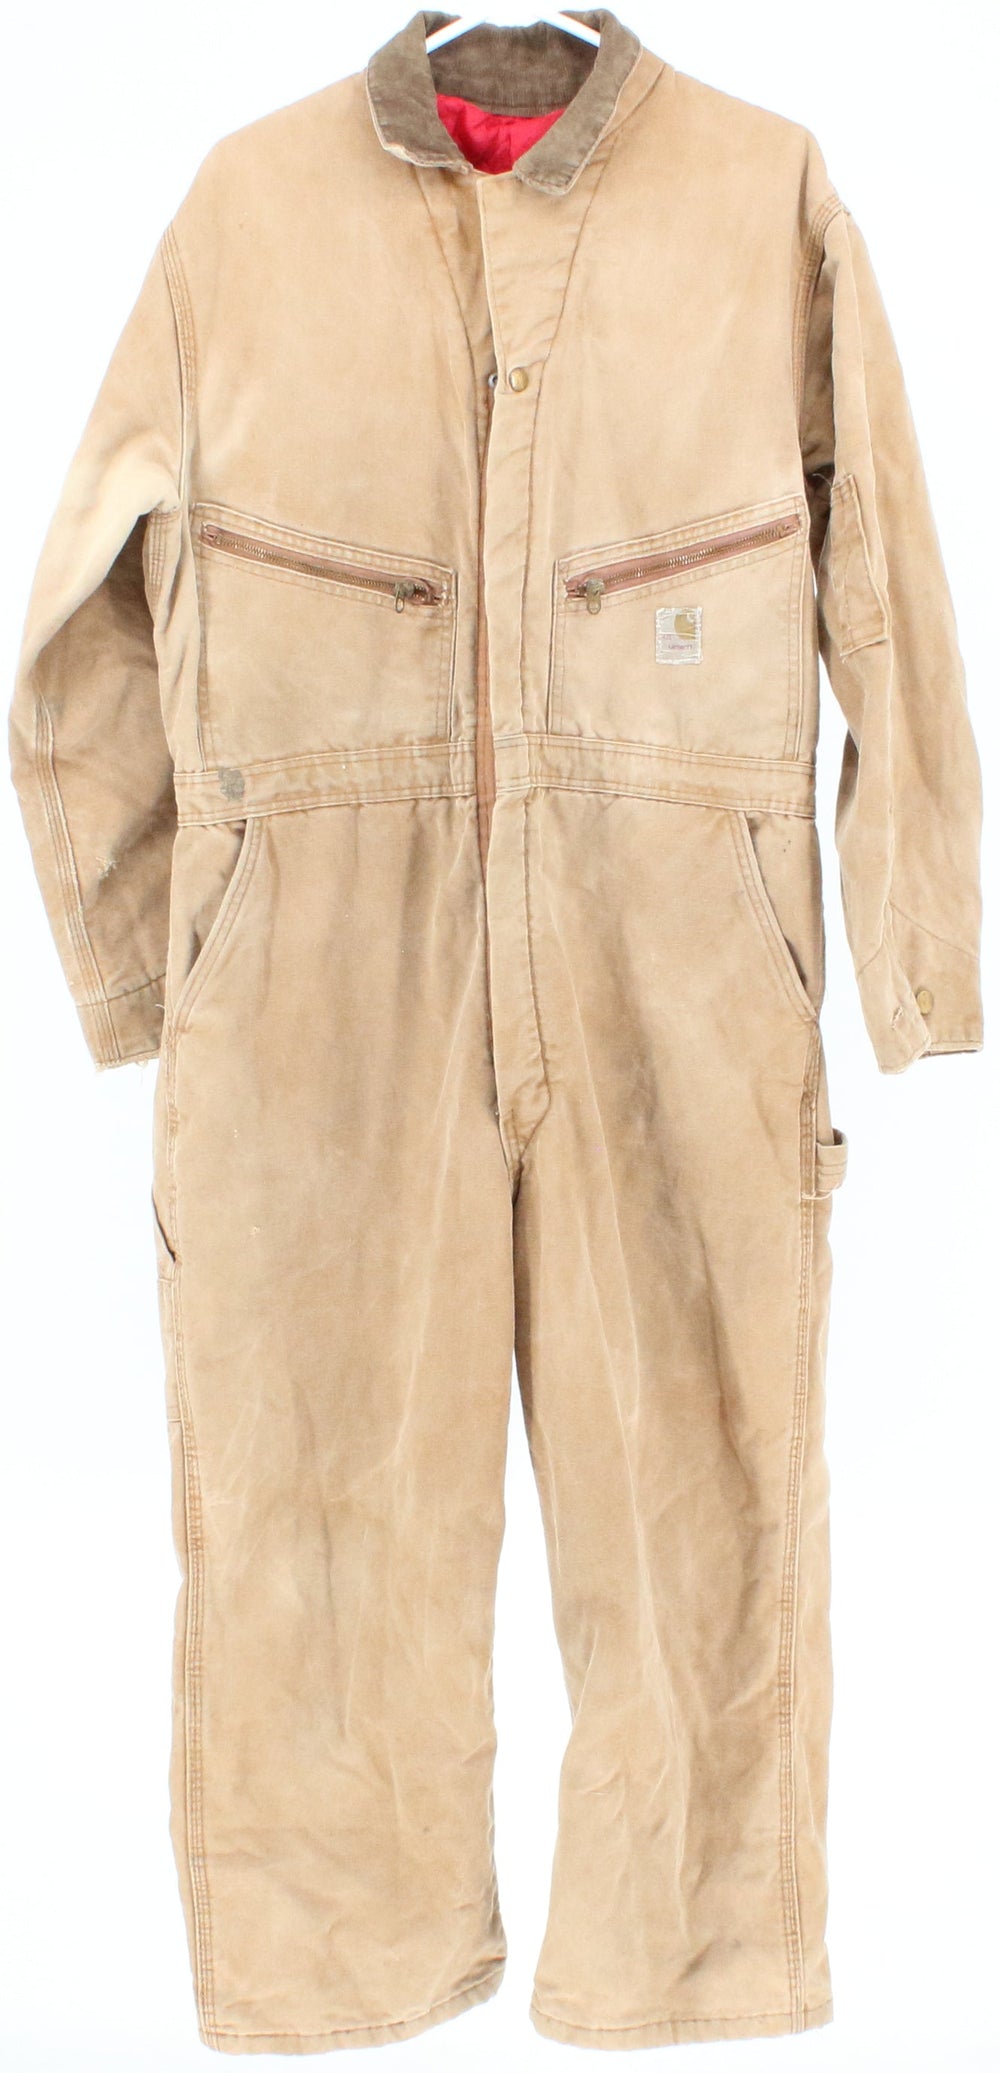 Carhartt Khaki Quilt Lined Coverall